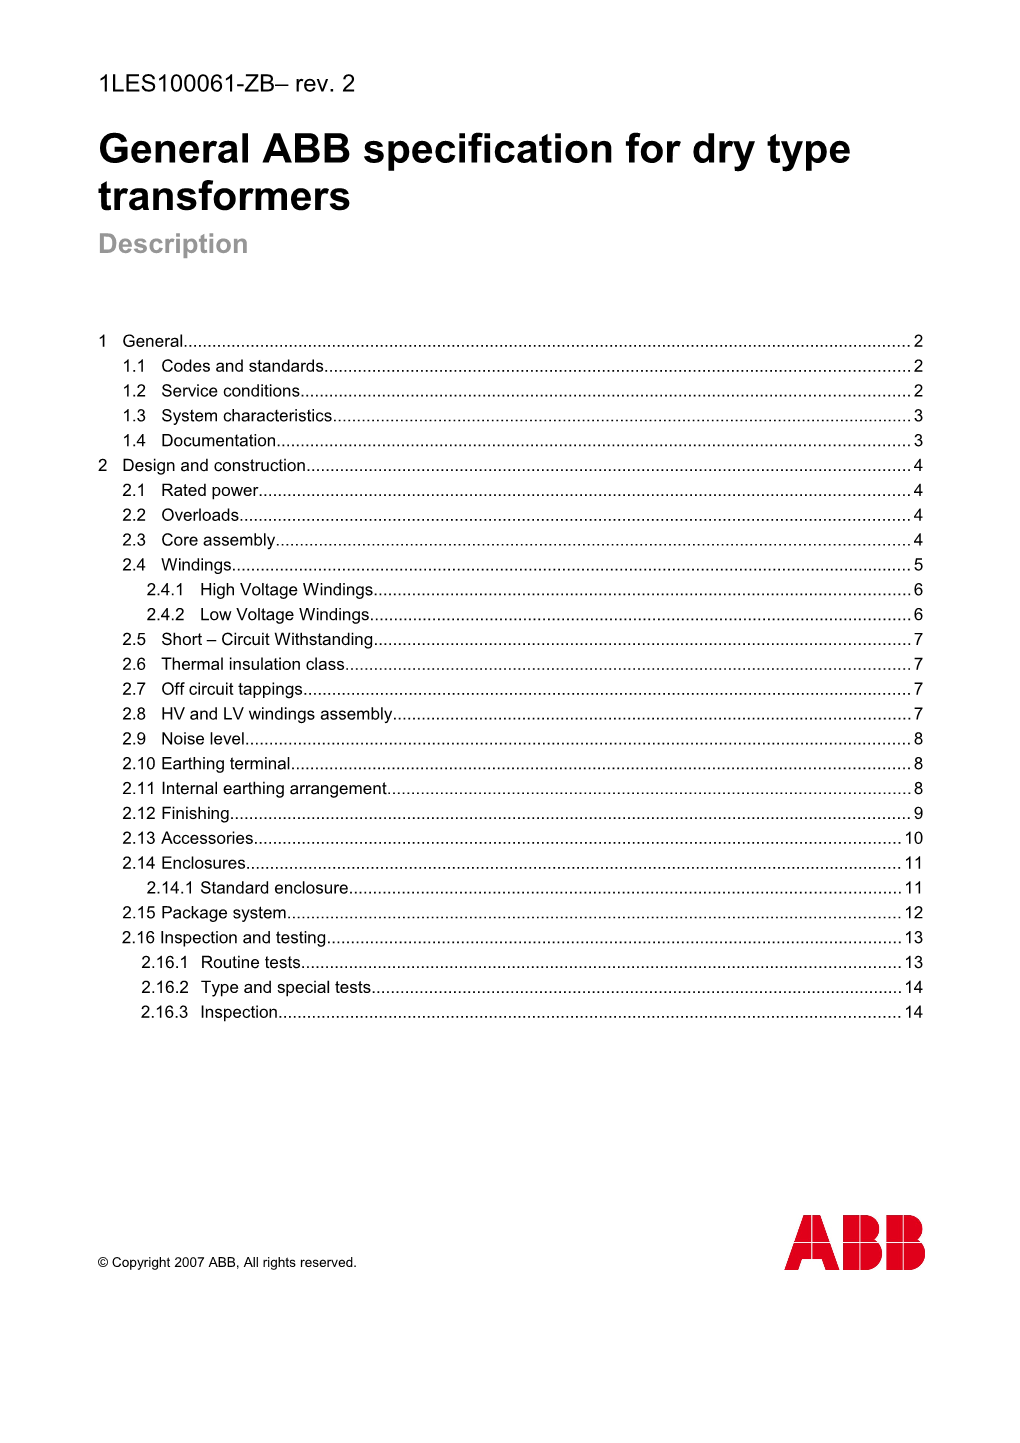 1LES100061-ZB General ABB Specification for Dry Type Transformers